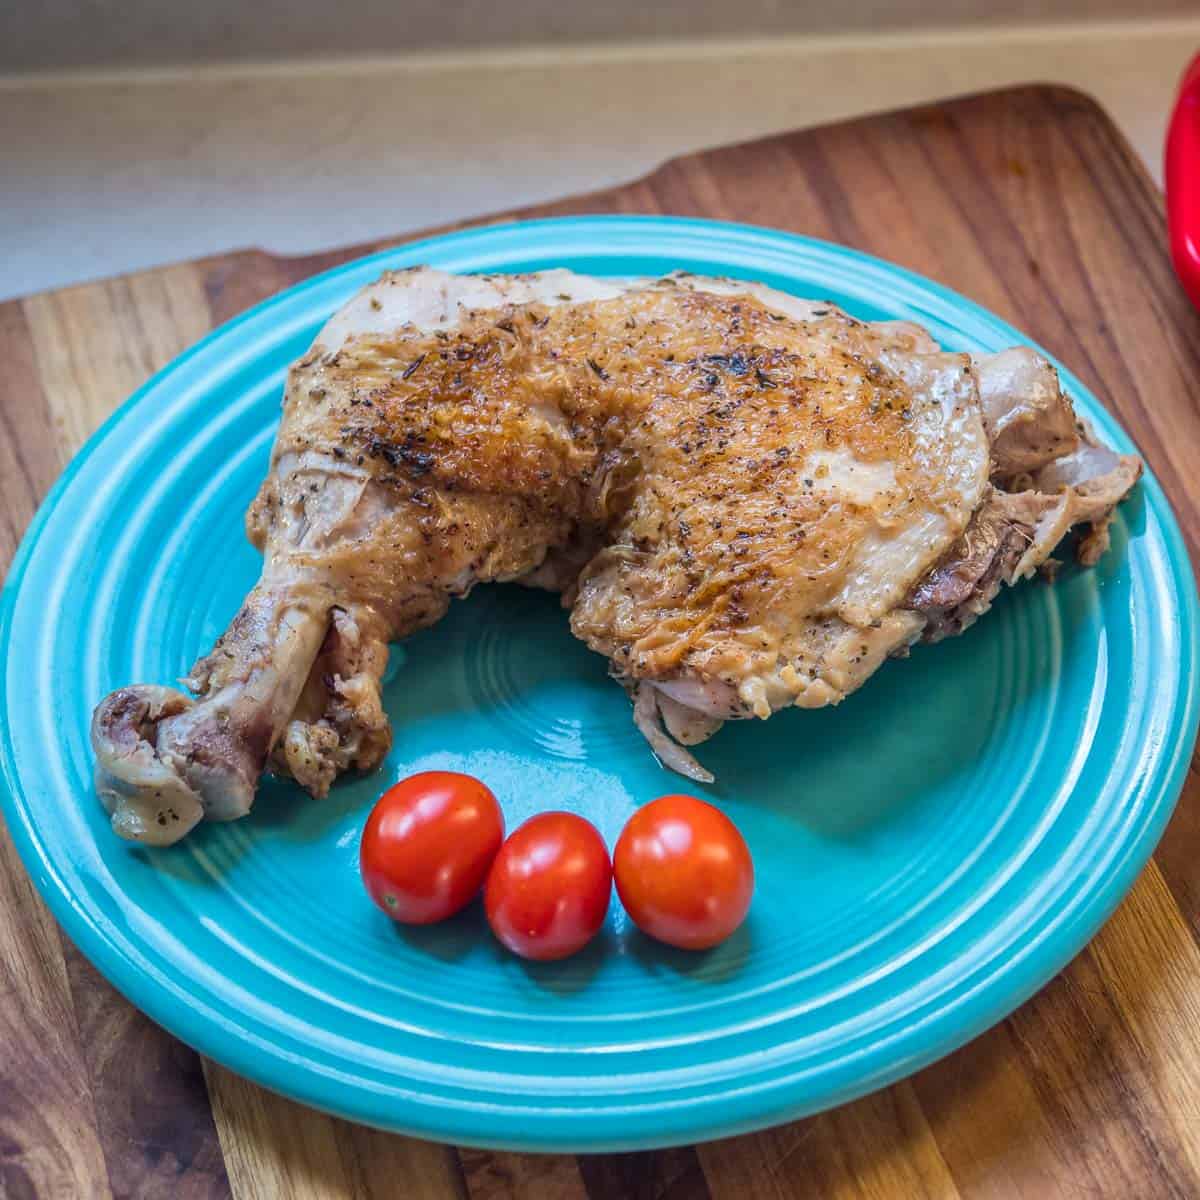 Cooked chicken leg on a plate with cherry tomatoes